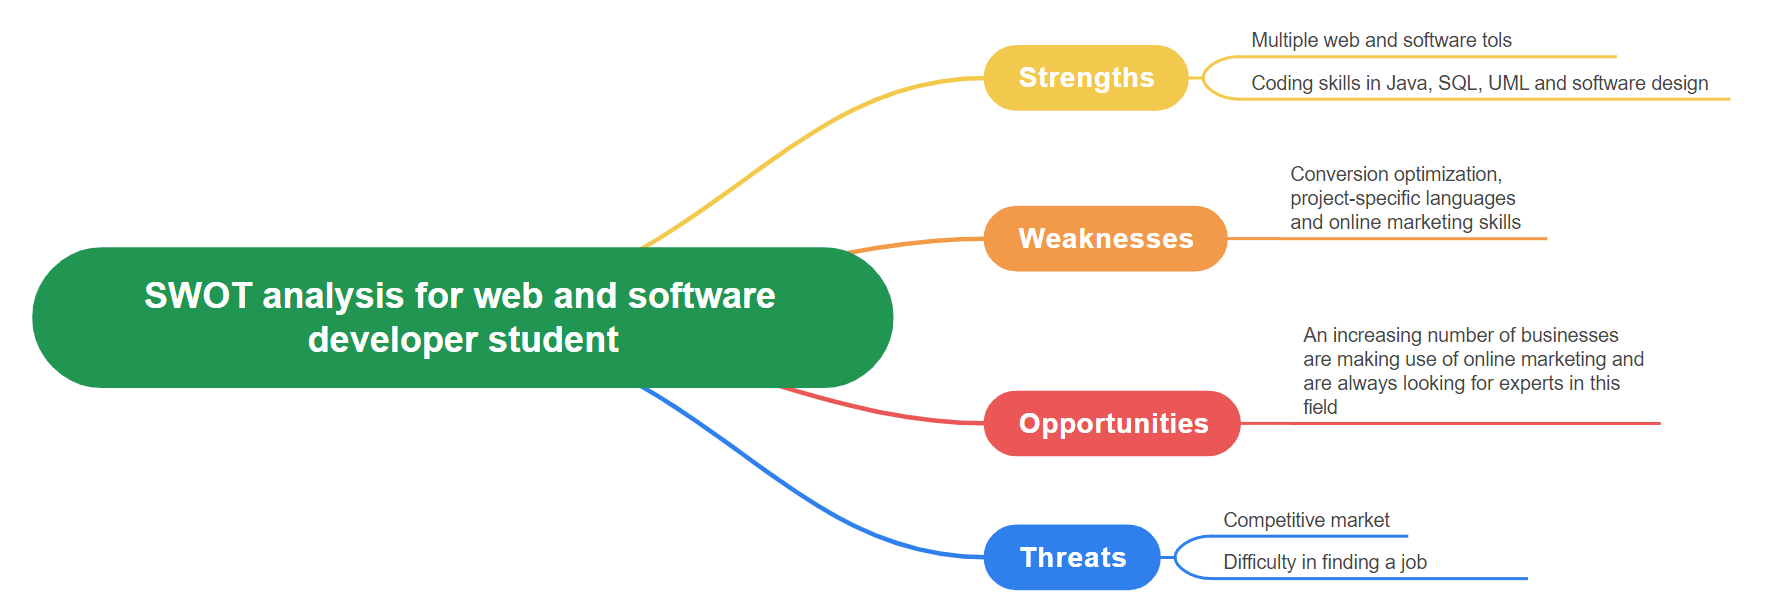 SWOT Analysis of web and software student